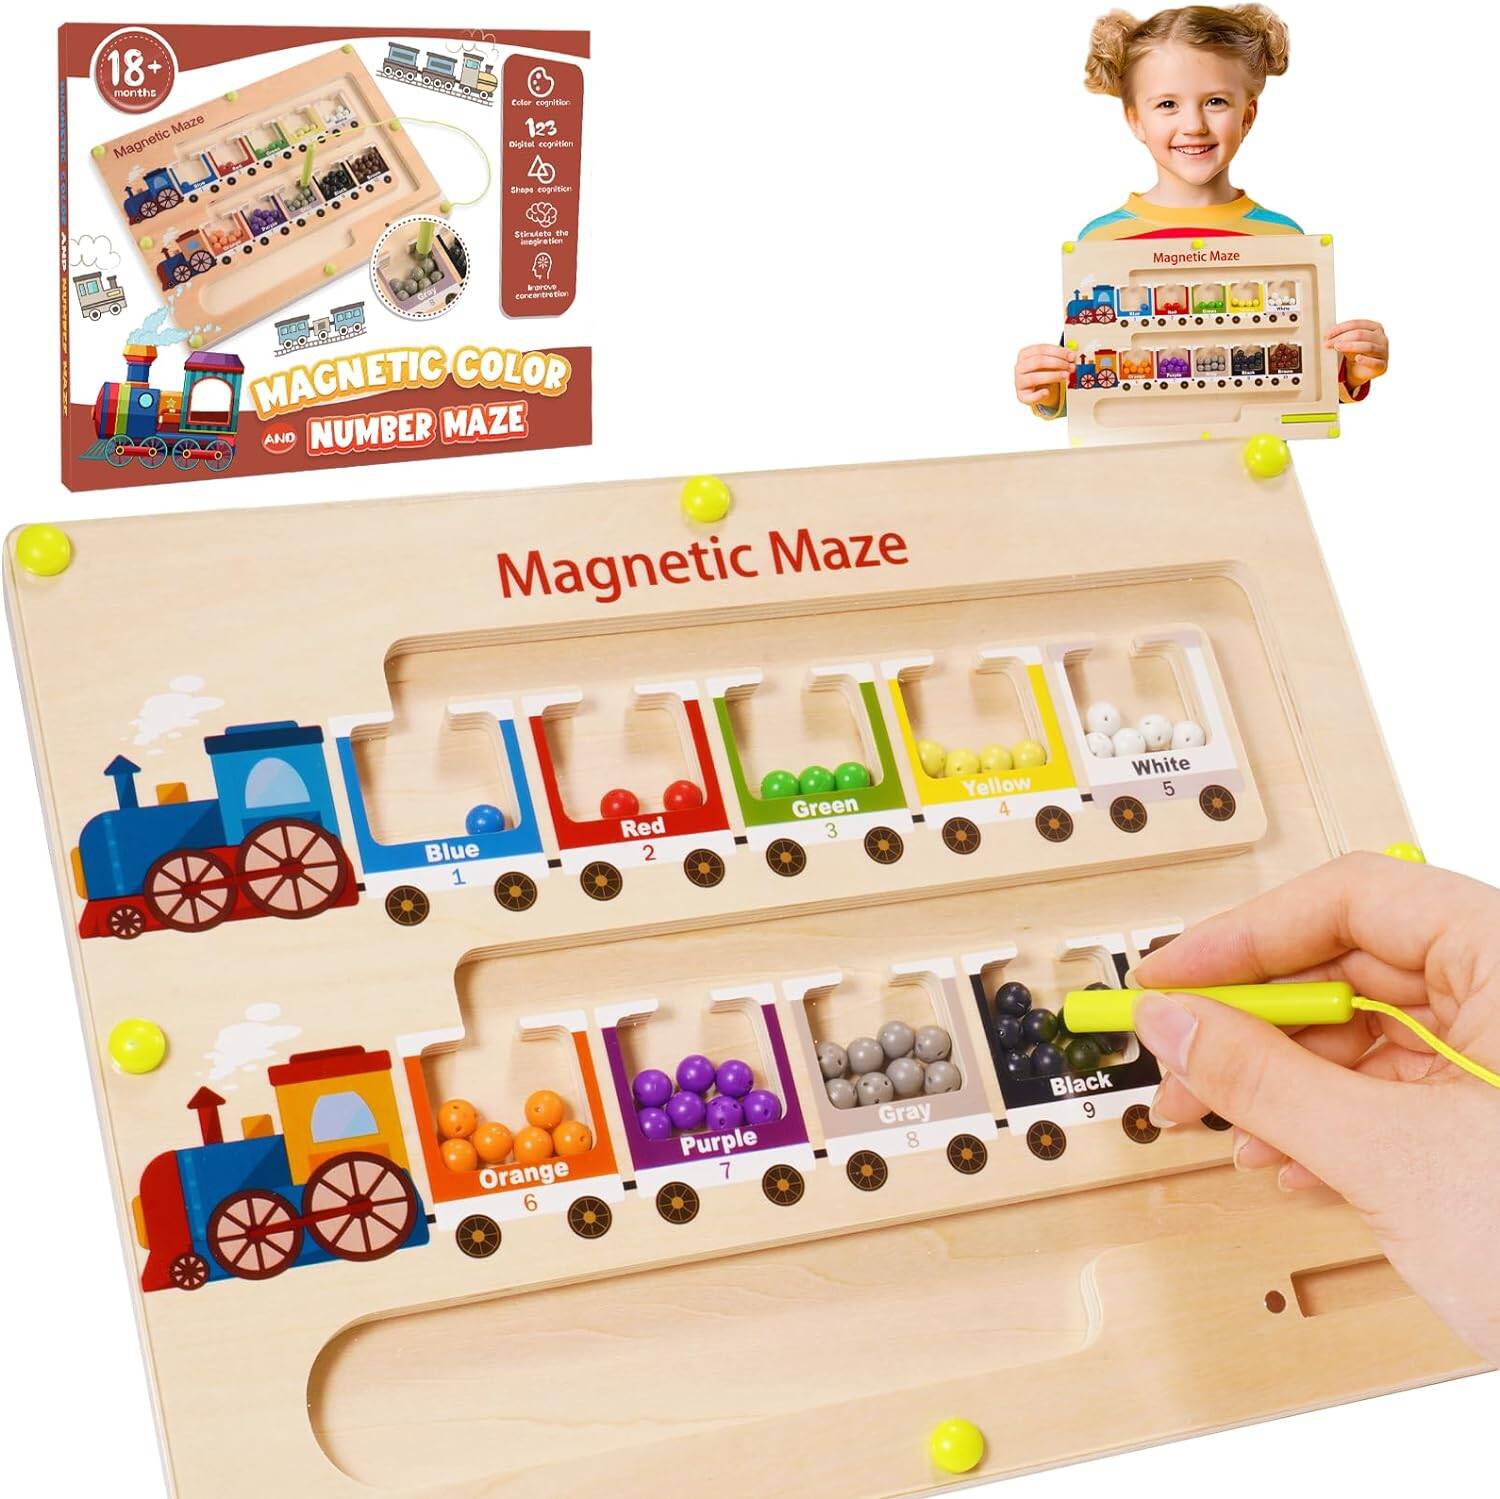 Toys for Toddlers, Magnetic Color and Number Maze Toys for 2-6 Year Old Boys, Train Toddler Toys 18 M+ Sensory Toys Christmas Birthday Gifts, Brown